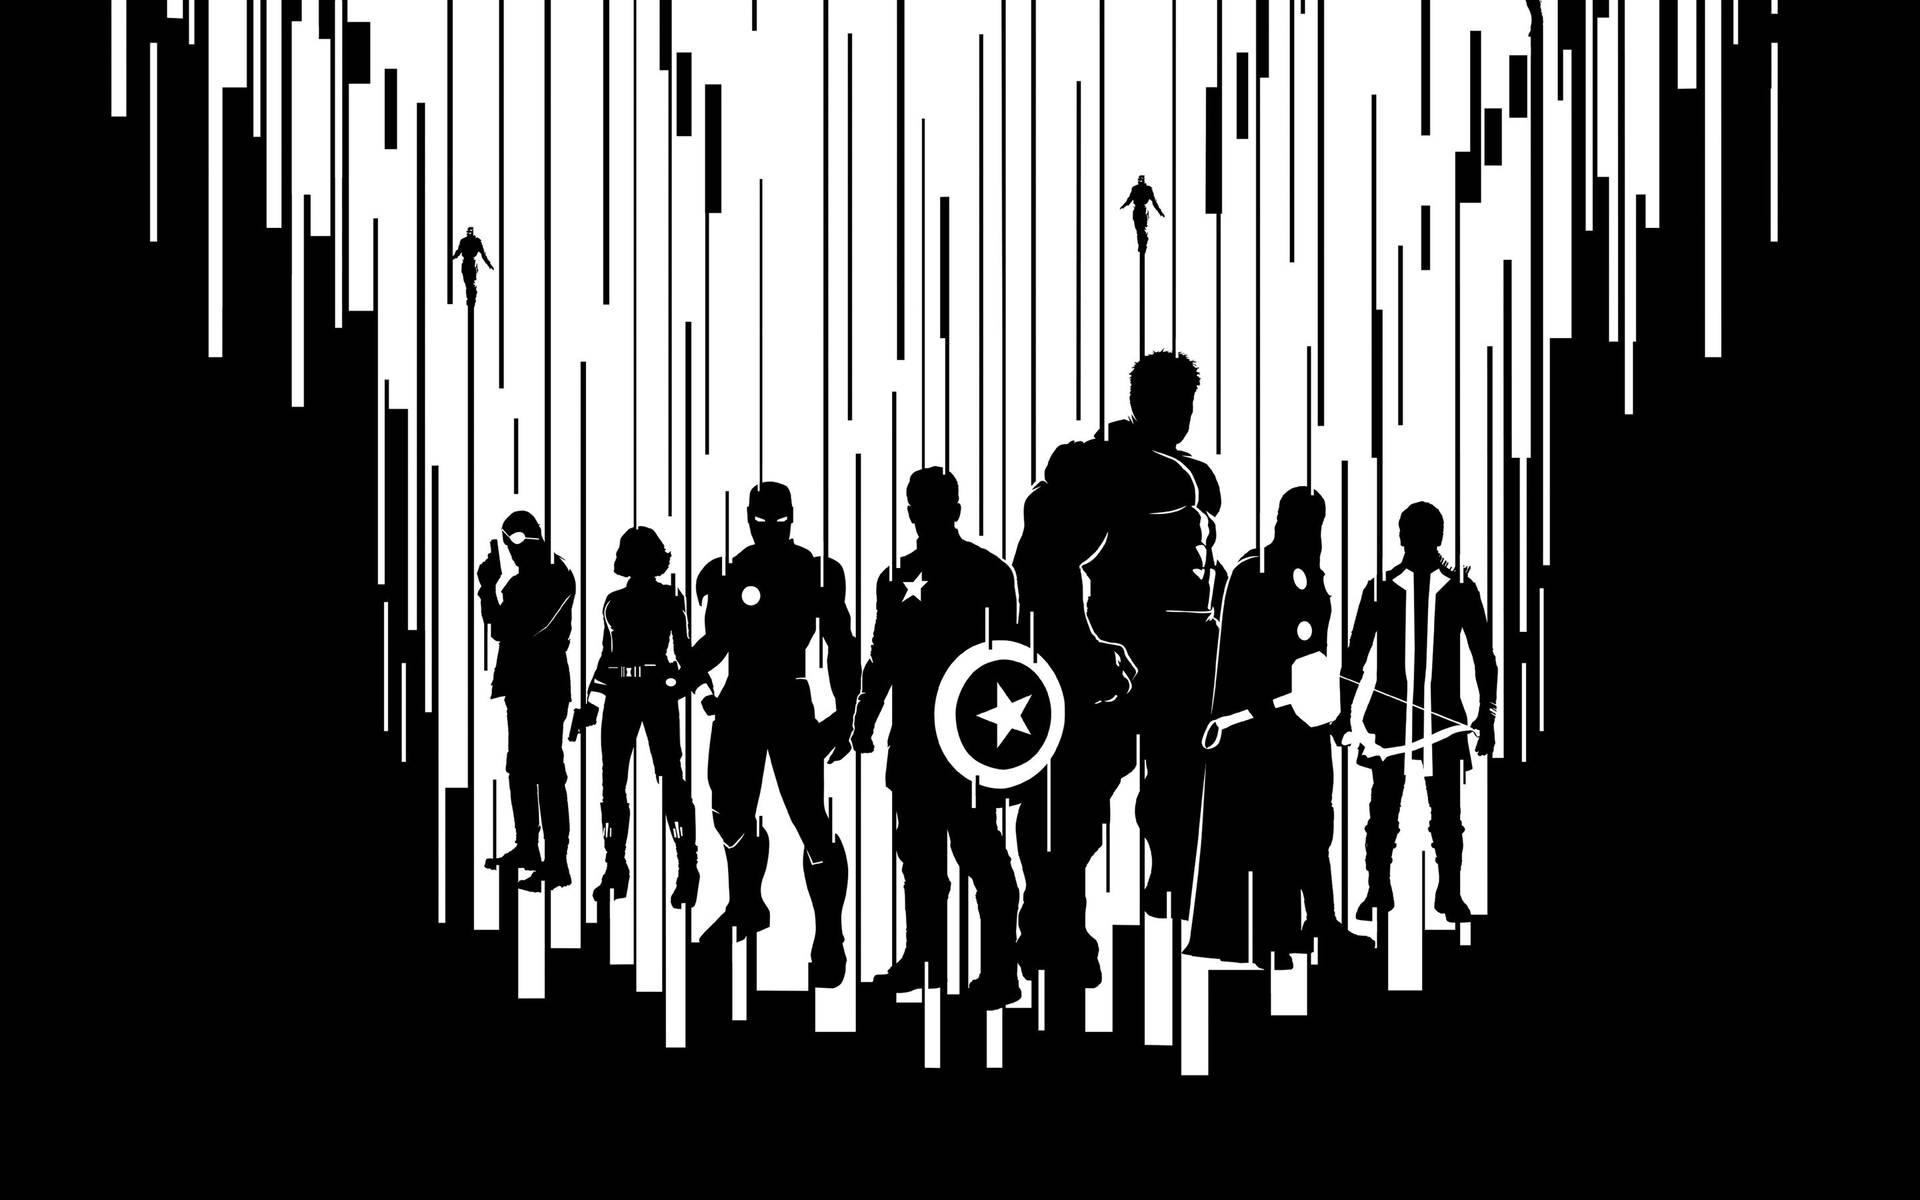 Avengers Marvel superhero characters in black and white.